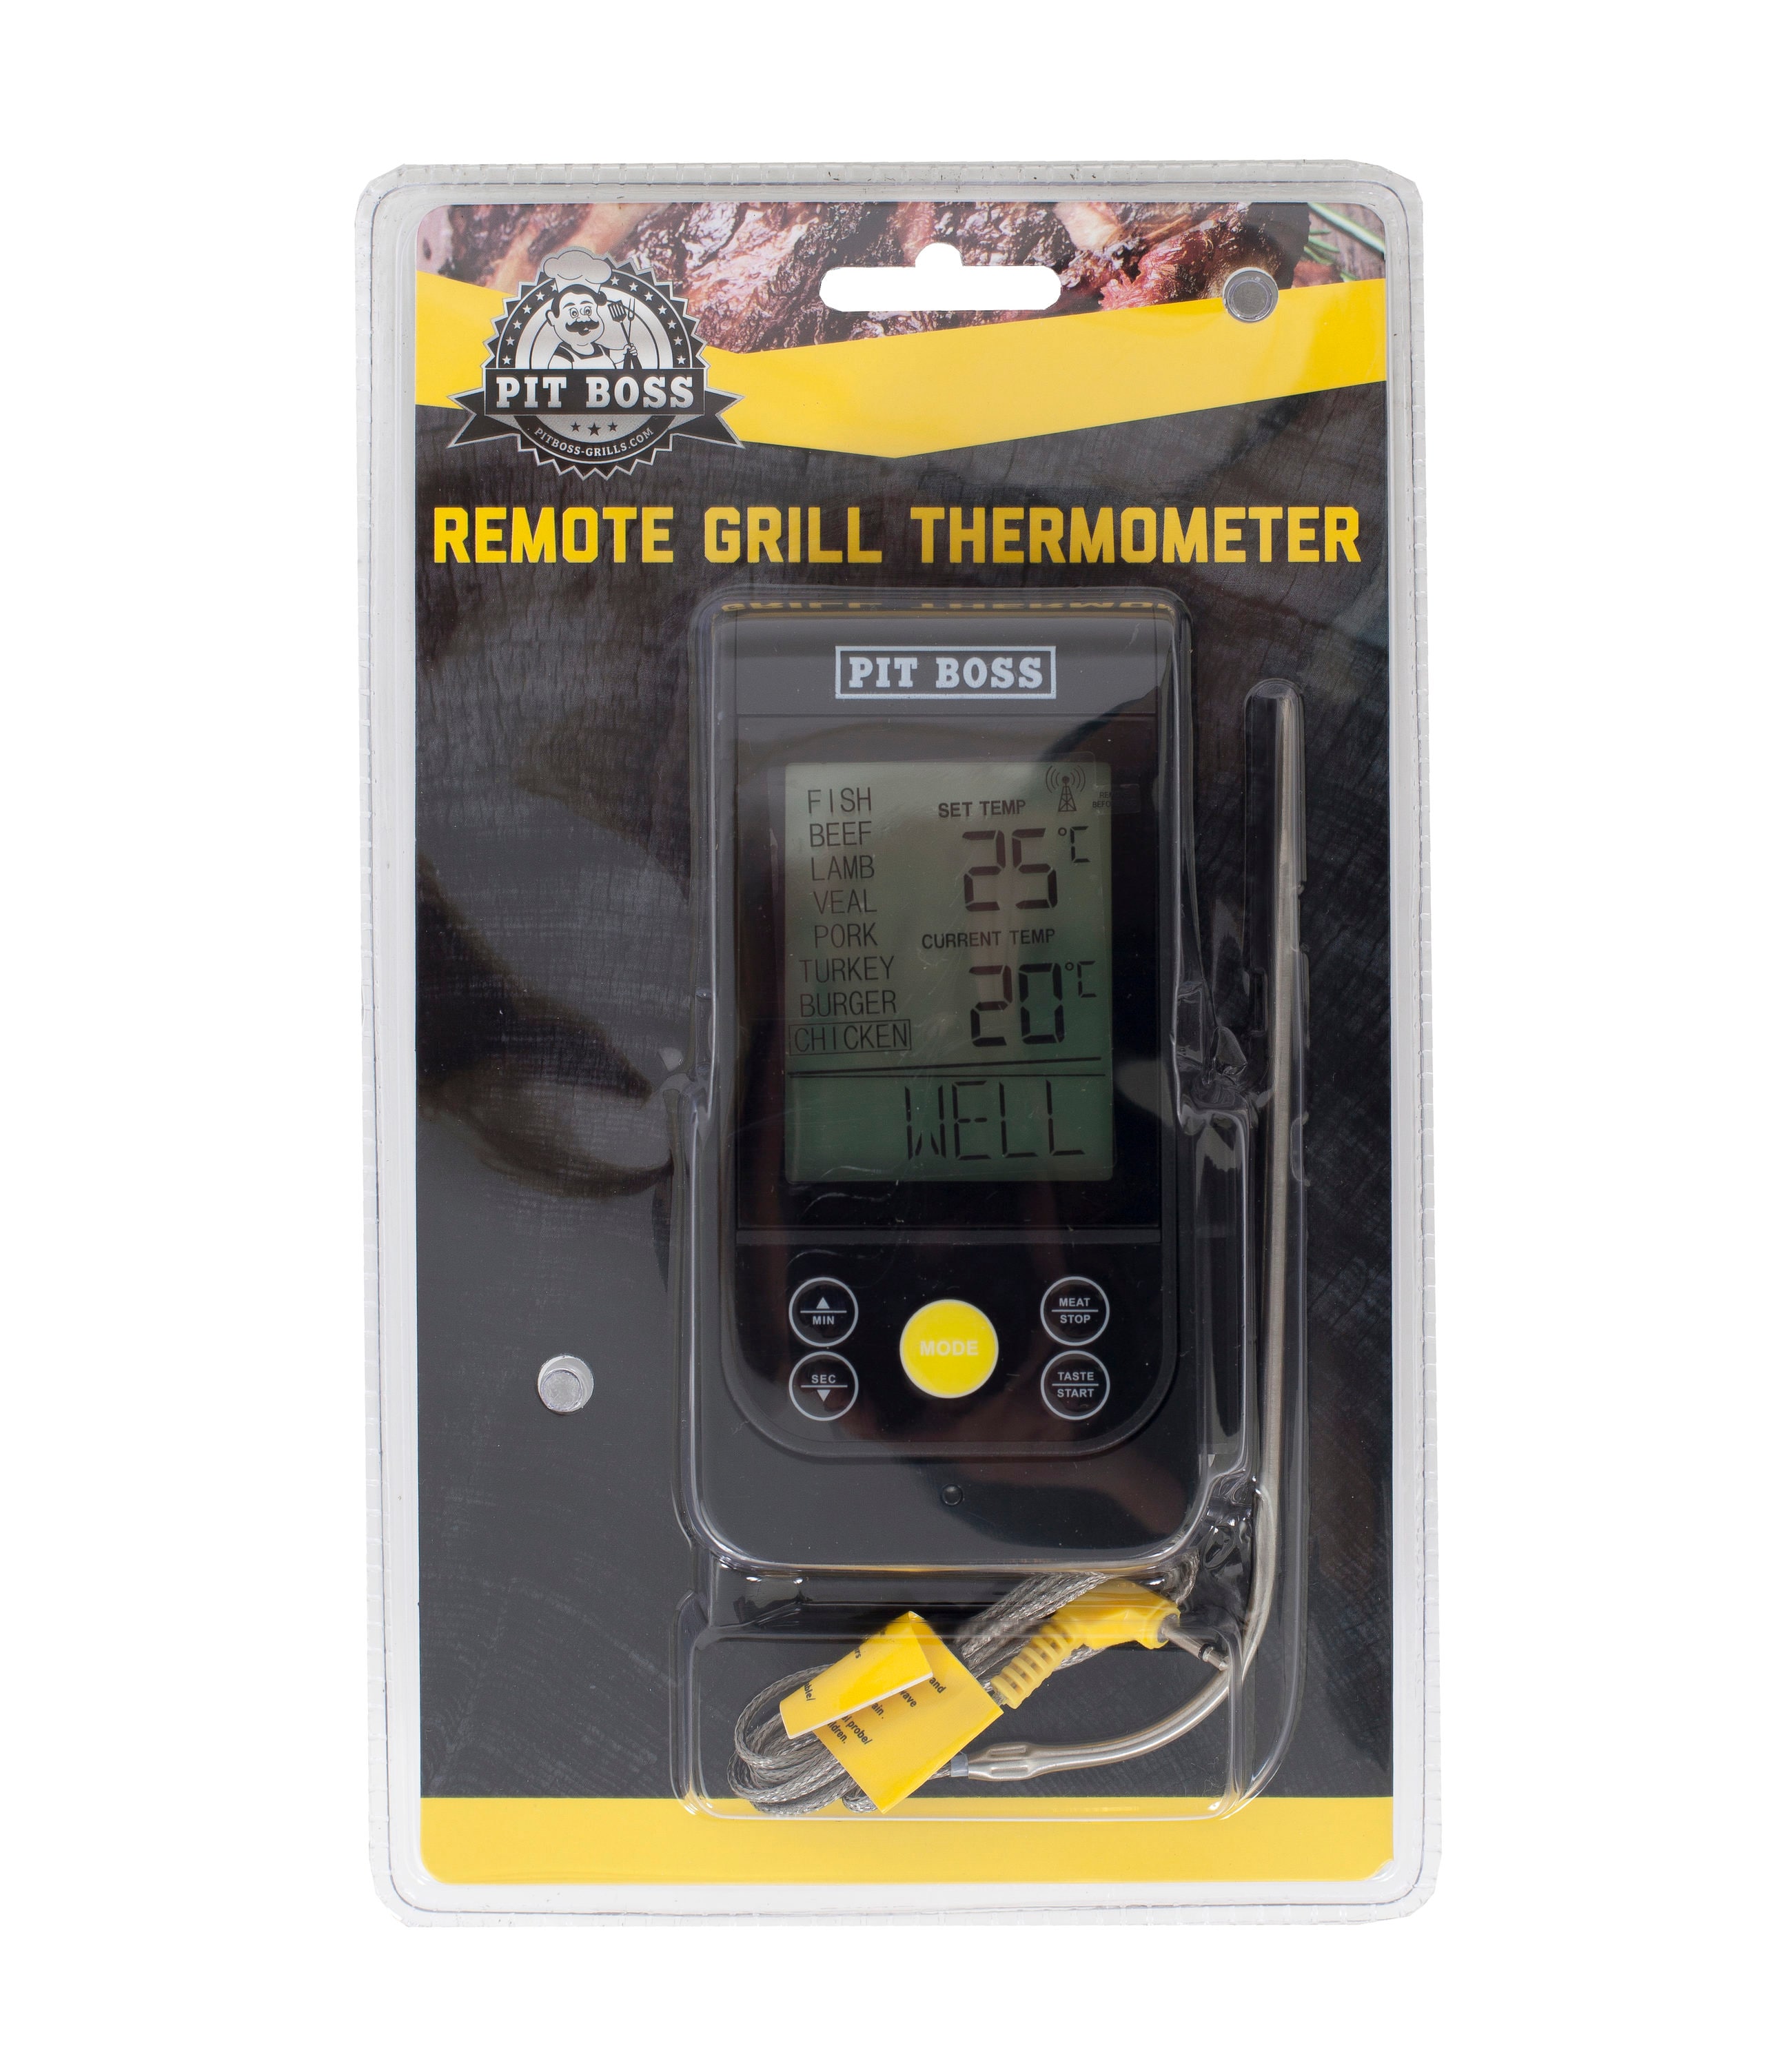 Pit Boss Remote Grill Thermometer Plastic Accessory Kit in the